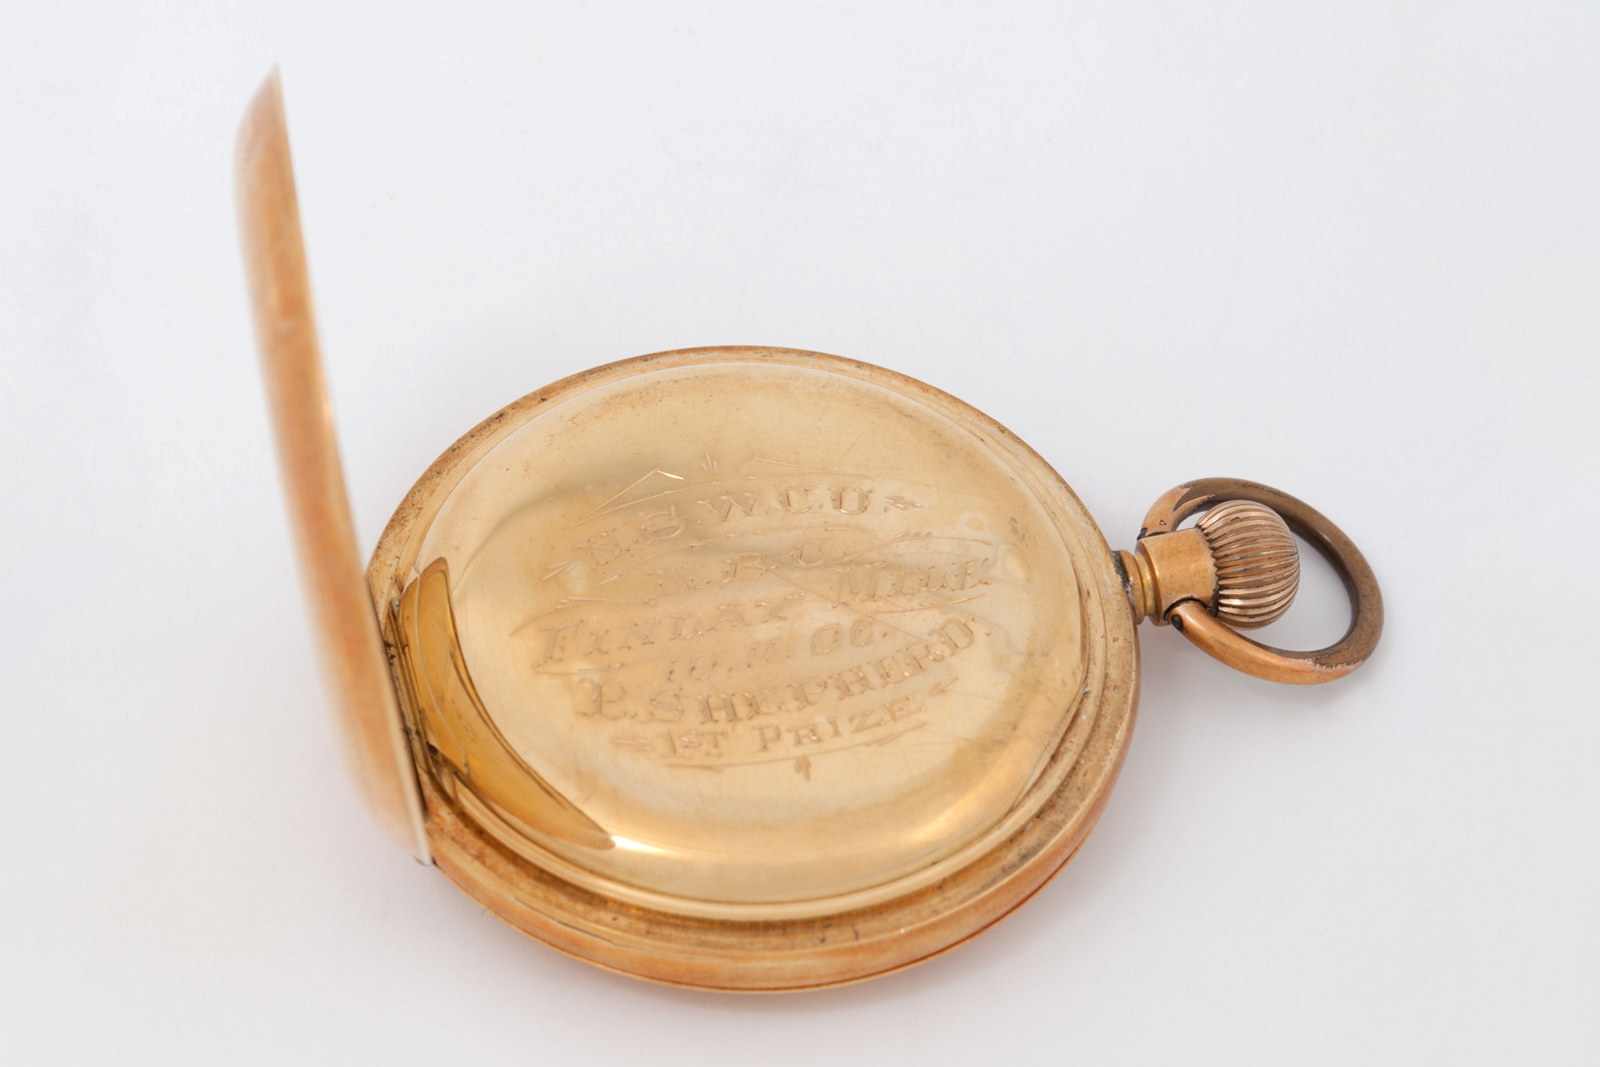 Gold pocket watch which belonged to a police officer, Sgt Percival Shepherd